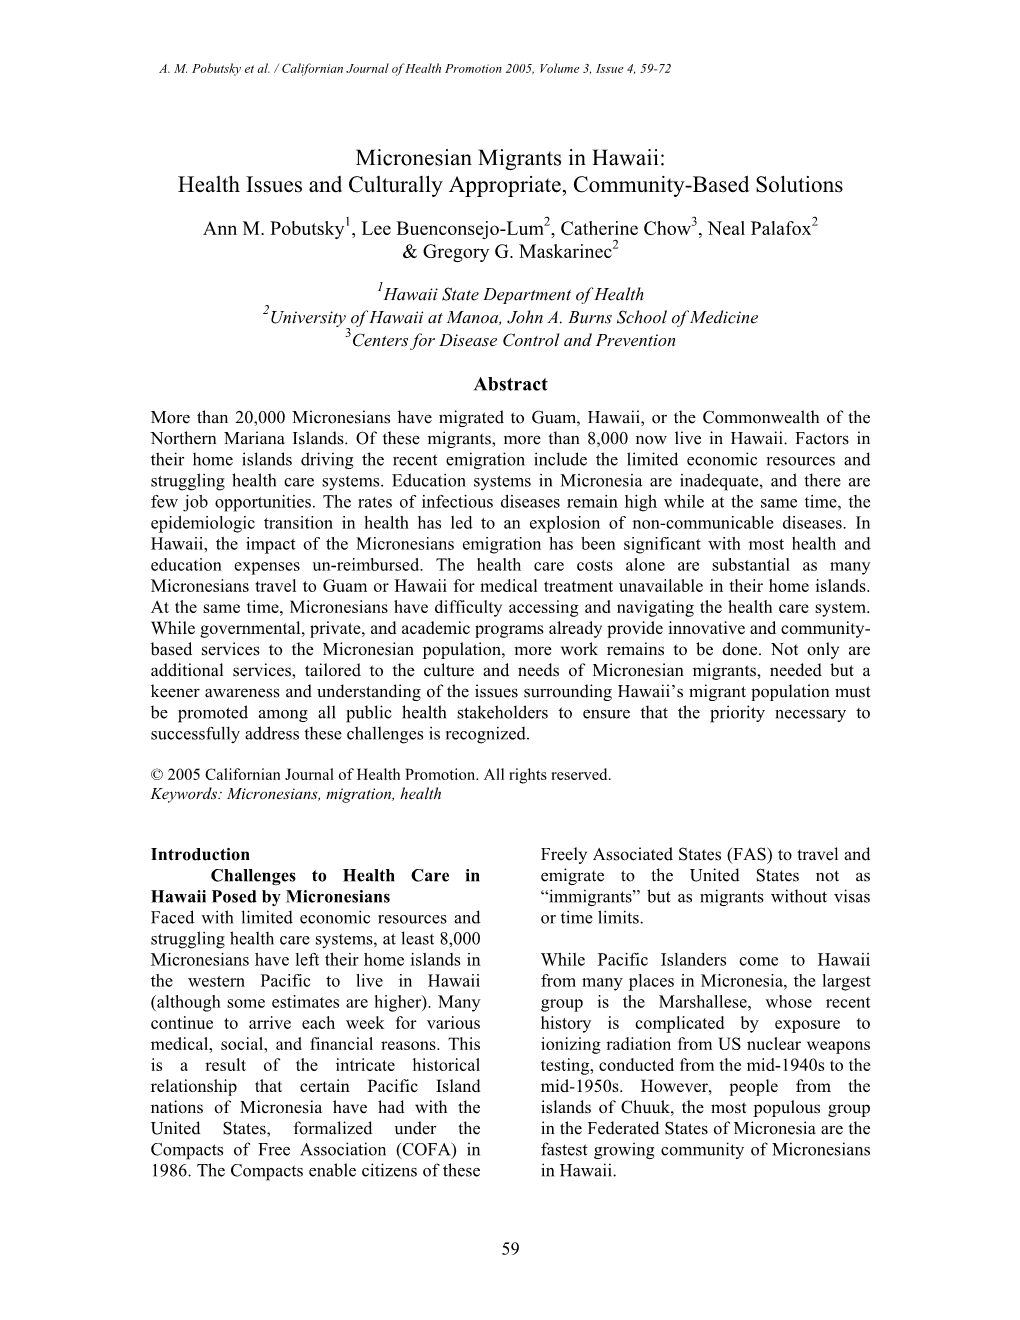 Micronesian Migrants in Hawaii: Health Issues and Culturally Appropriate, Community-Based Solutions